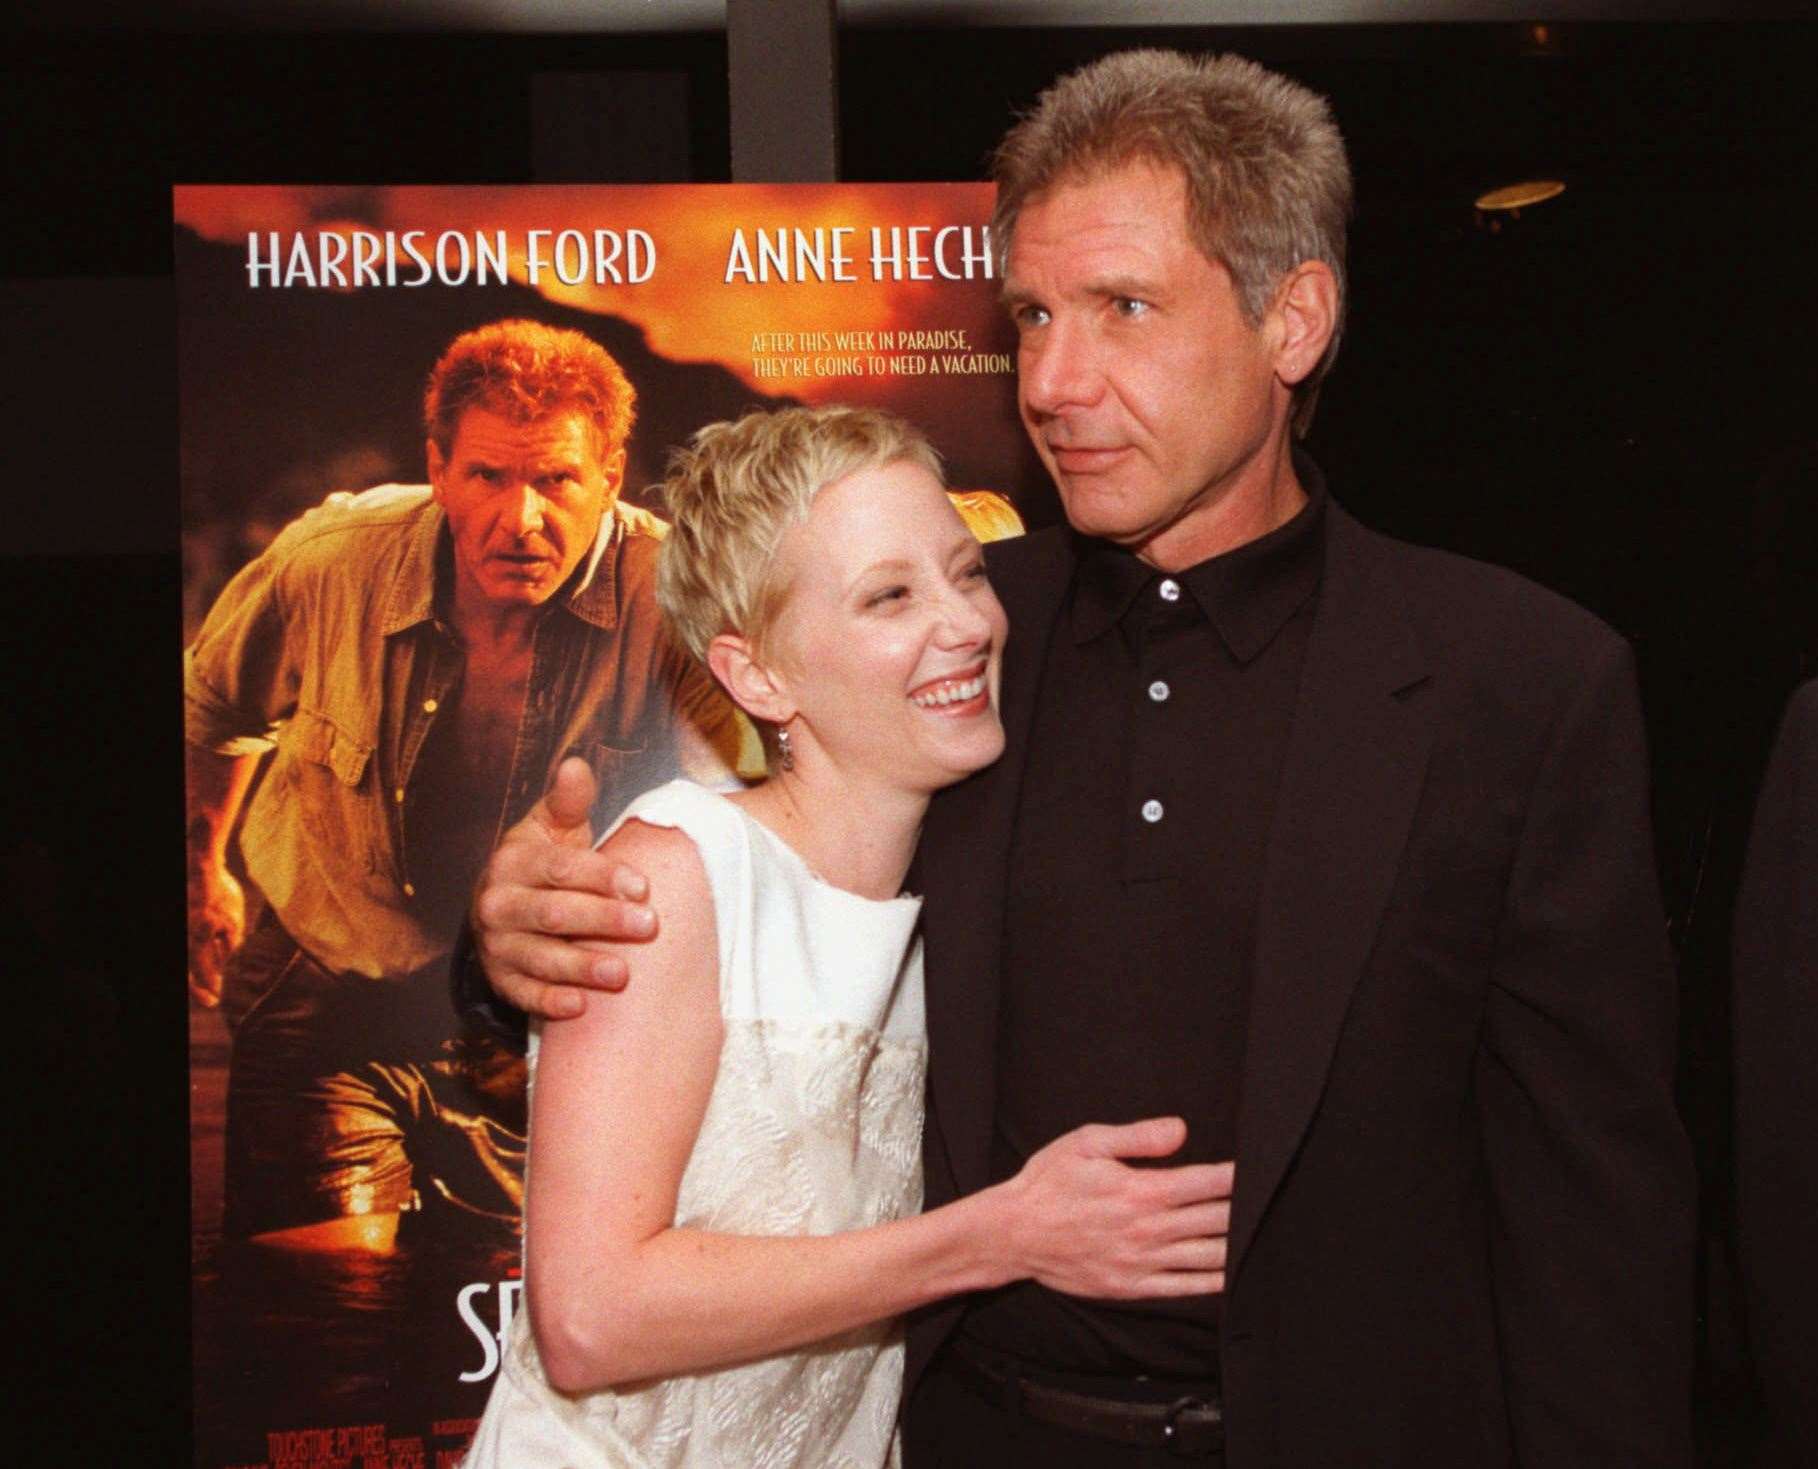 Anne Heche and Harrison Ford embrace at the premiere of their film, Six Days, Seven Nights in 1998 (Chris Pizzello/AP)